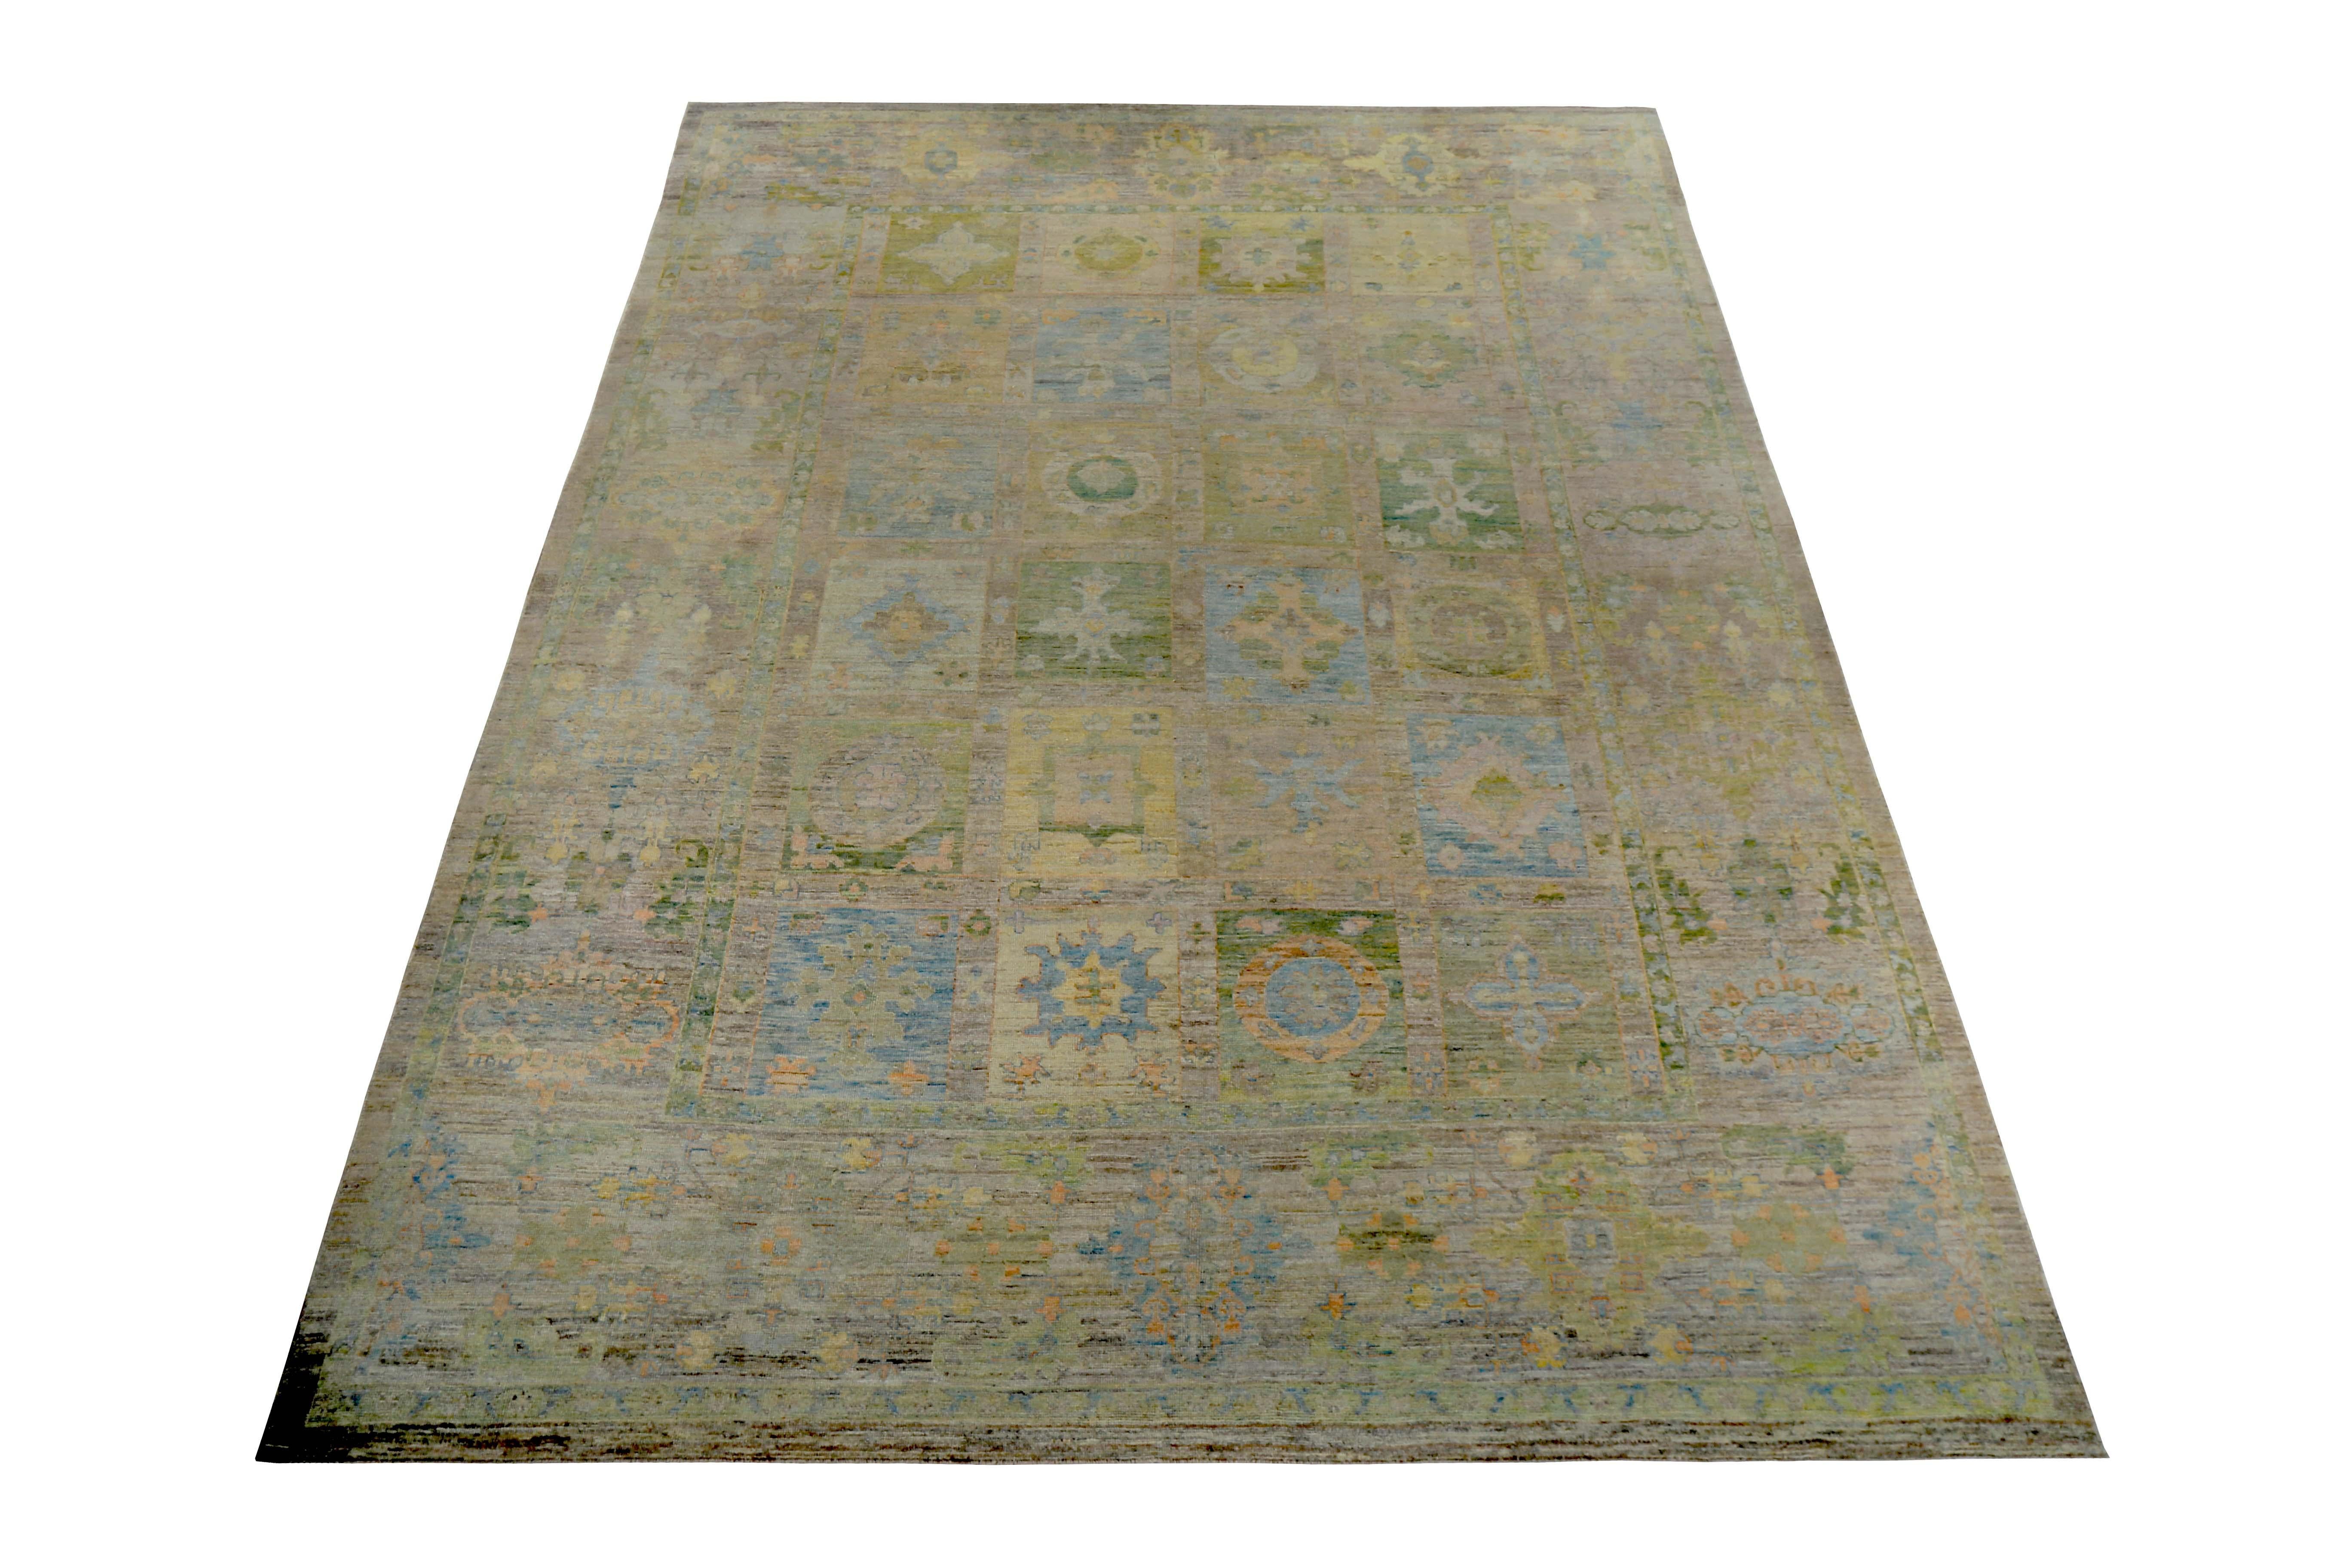 New Turkish rug made of handwoven sheep’s wool of the finest quality. It’s colored with organic vegetable dyes that are certified safe for humans and pets alike. It features floral blocks in blue and green over a brown field. Flower patterns are